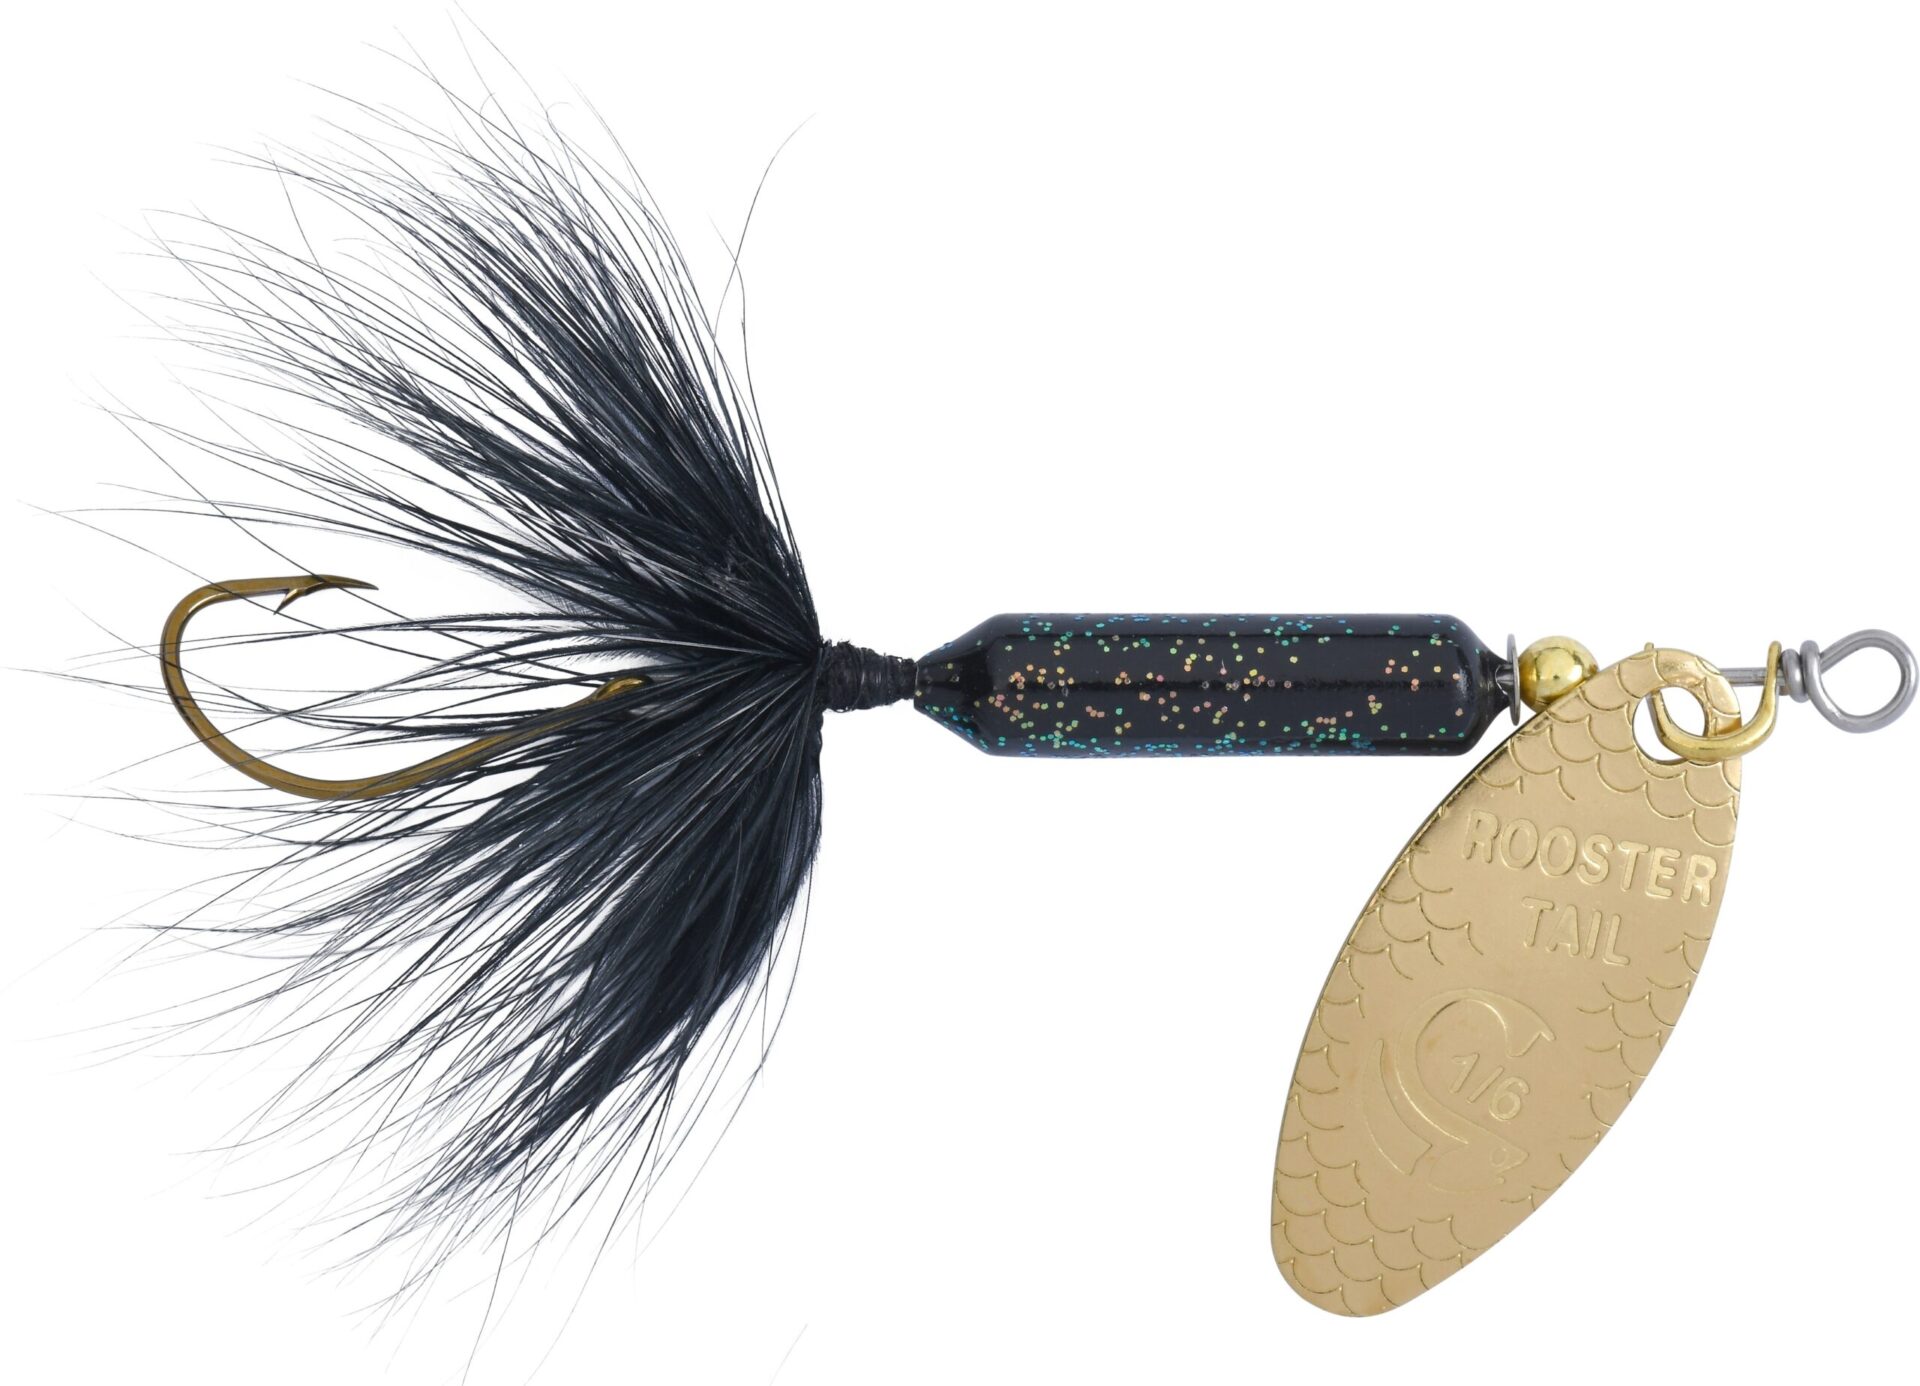 Single Hook Rooster Tail spinners